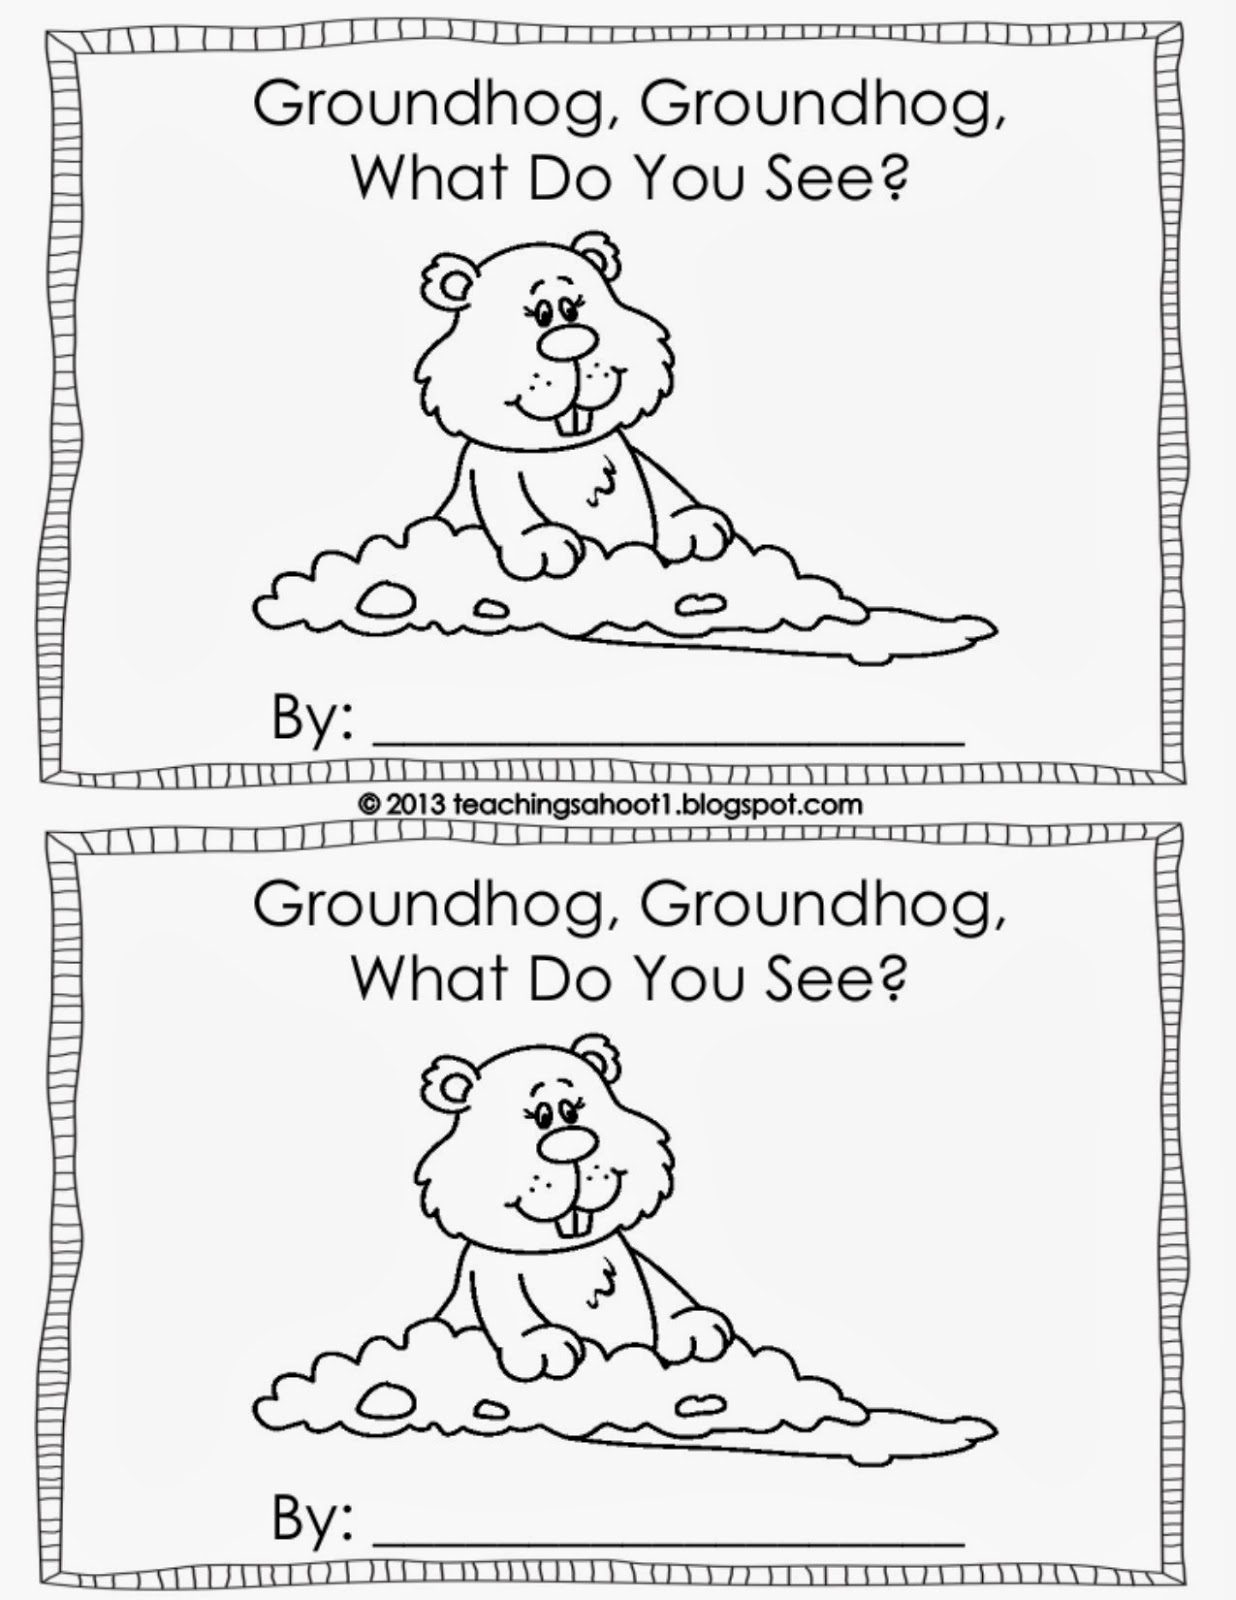 second-grade-signpost-tried-it-tuesday-groundhog-day-craft-freebie